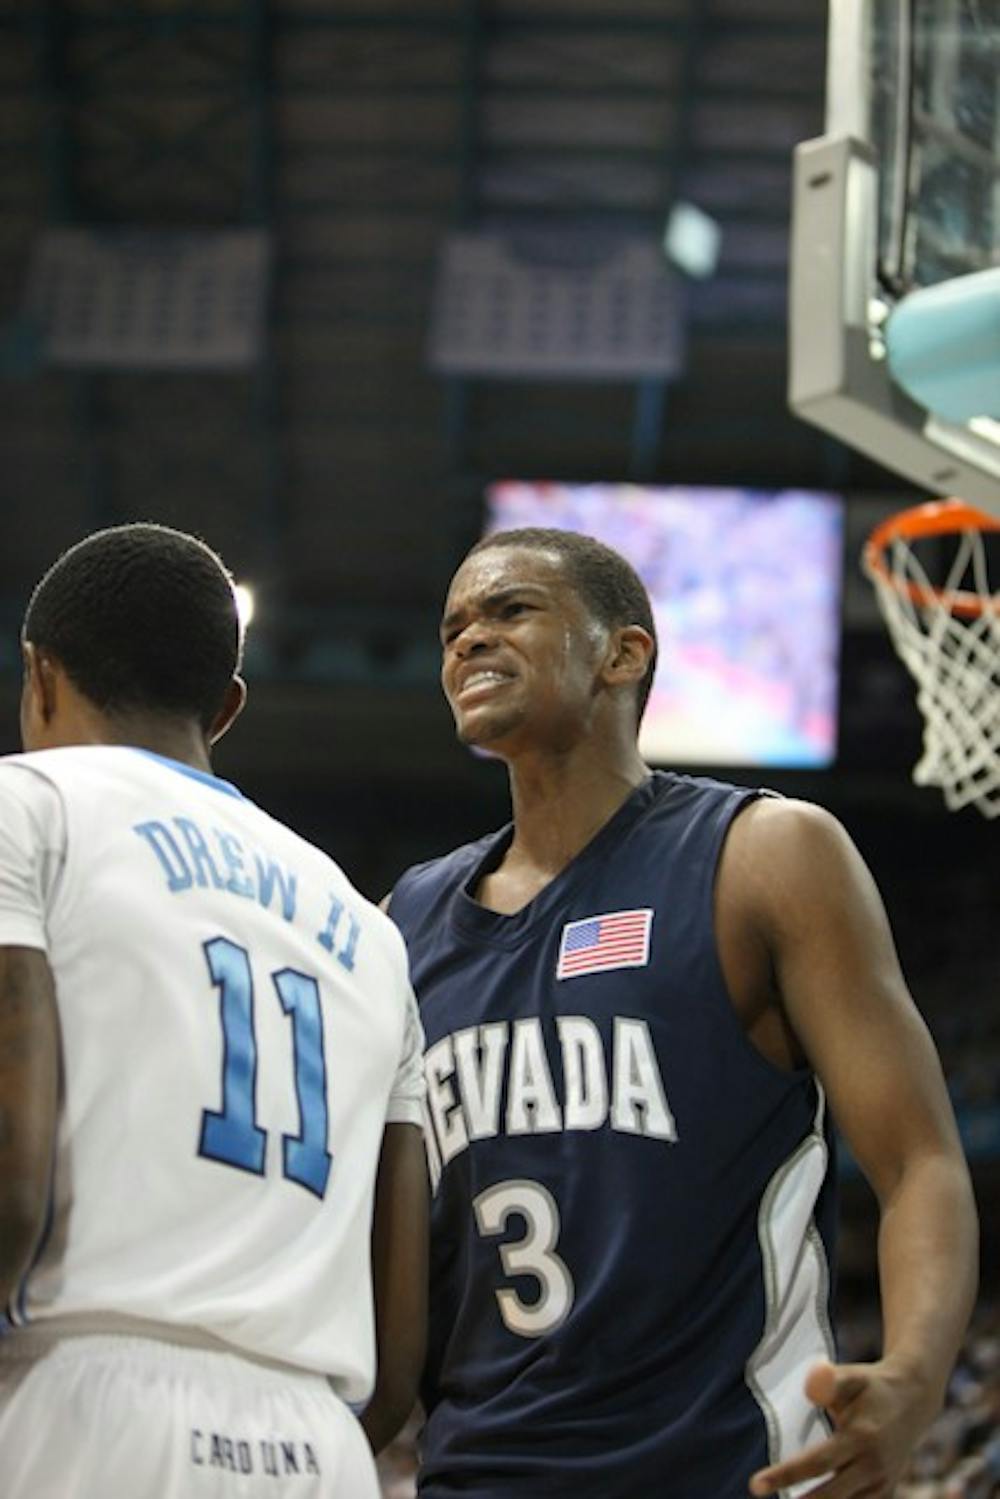 Larry Drew II helped lead the Tar Heels to a 80-73 victory against Nevada.